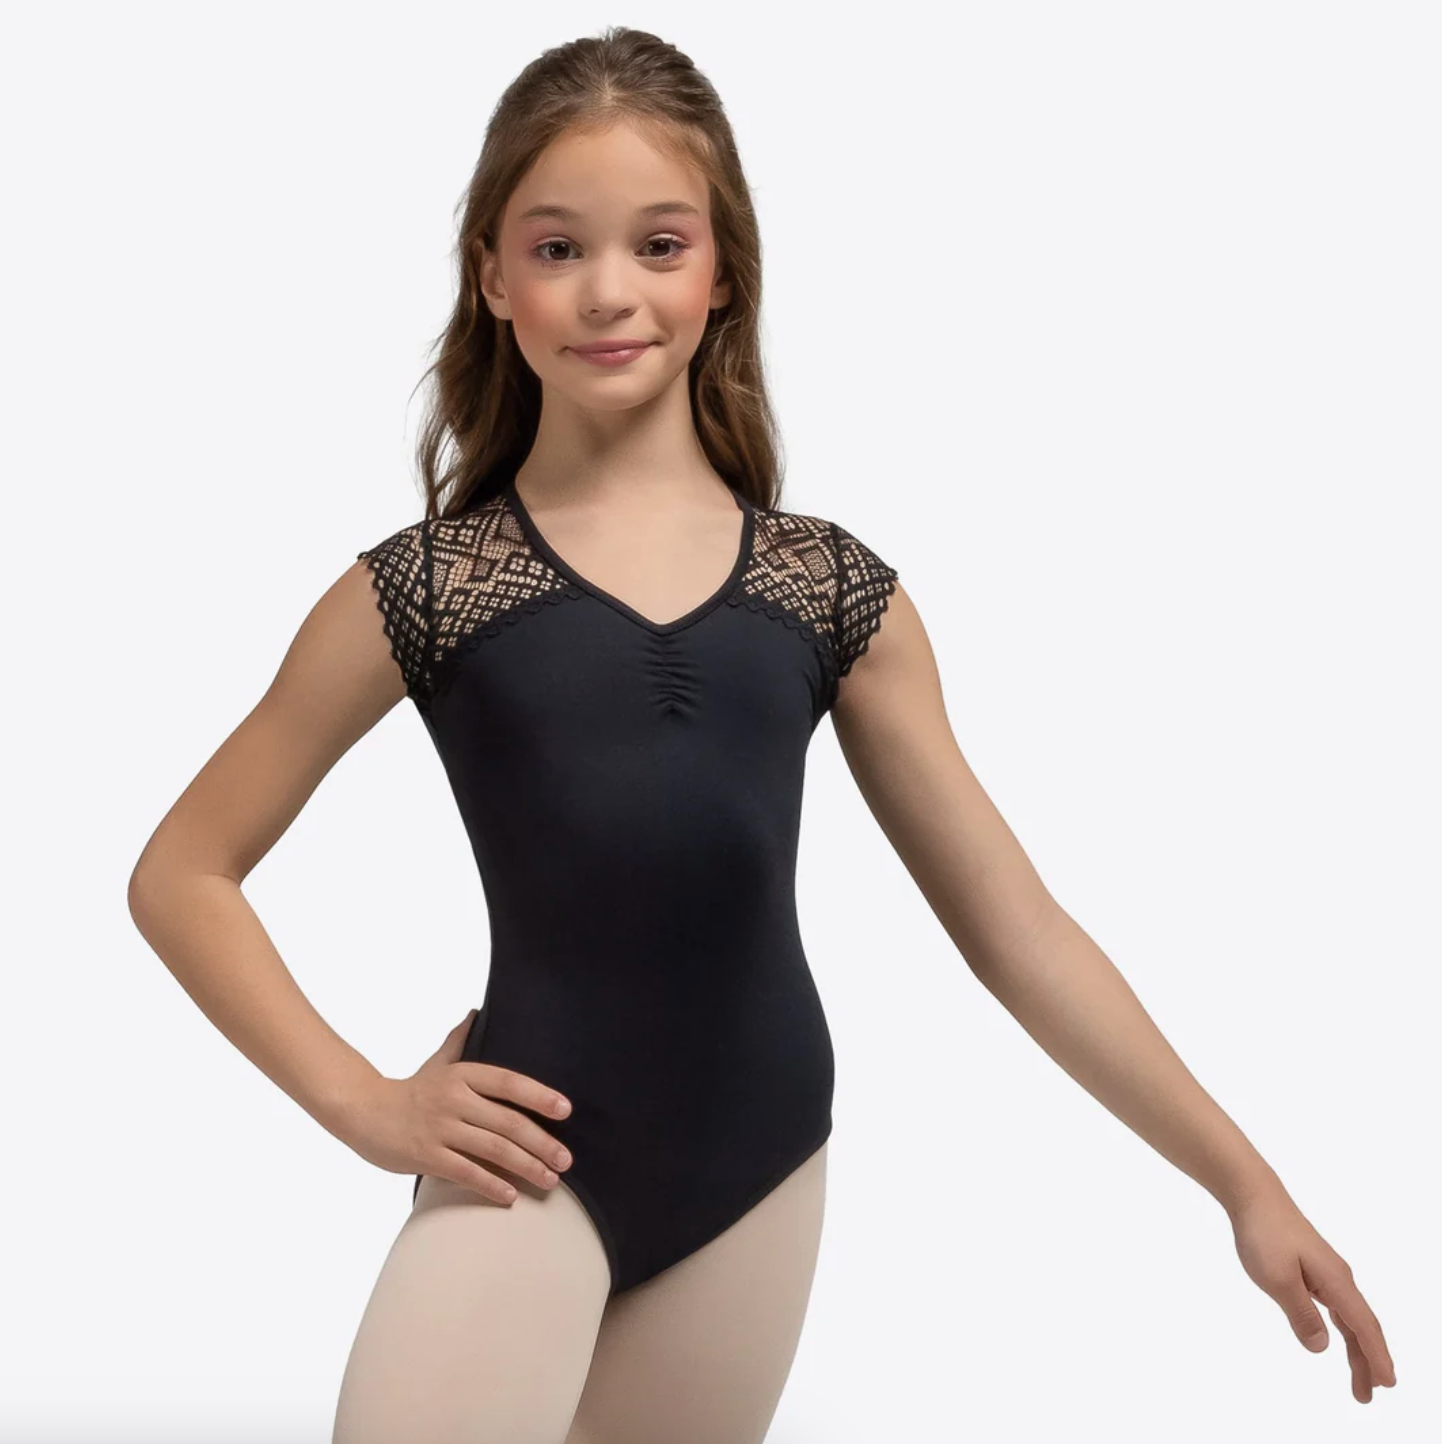 Lace Dance Leotards for Women & Girls - Move Dance